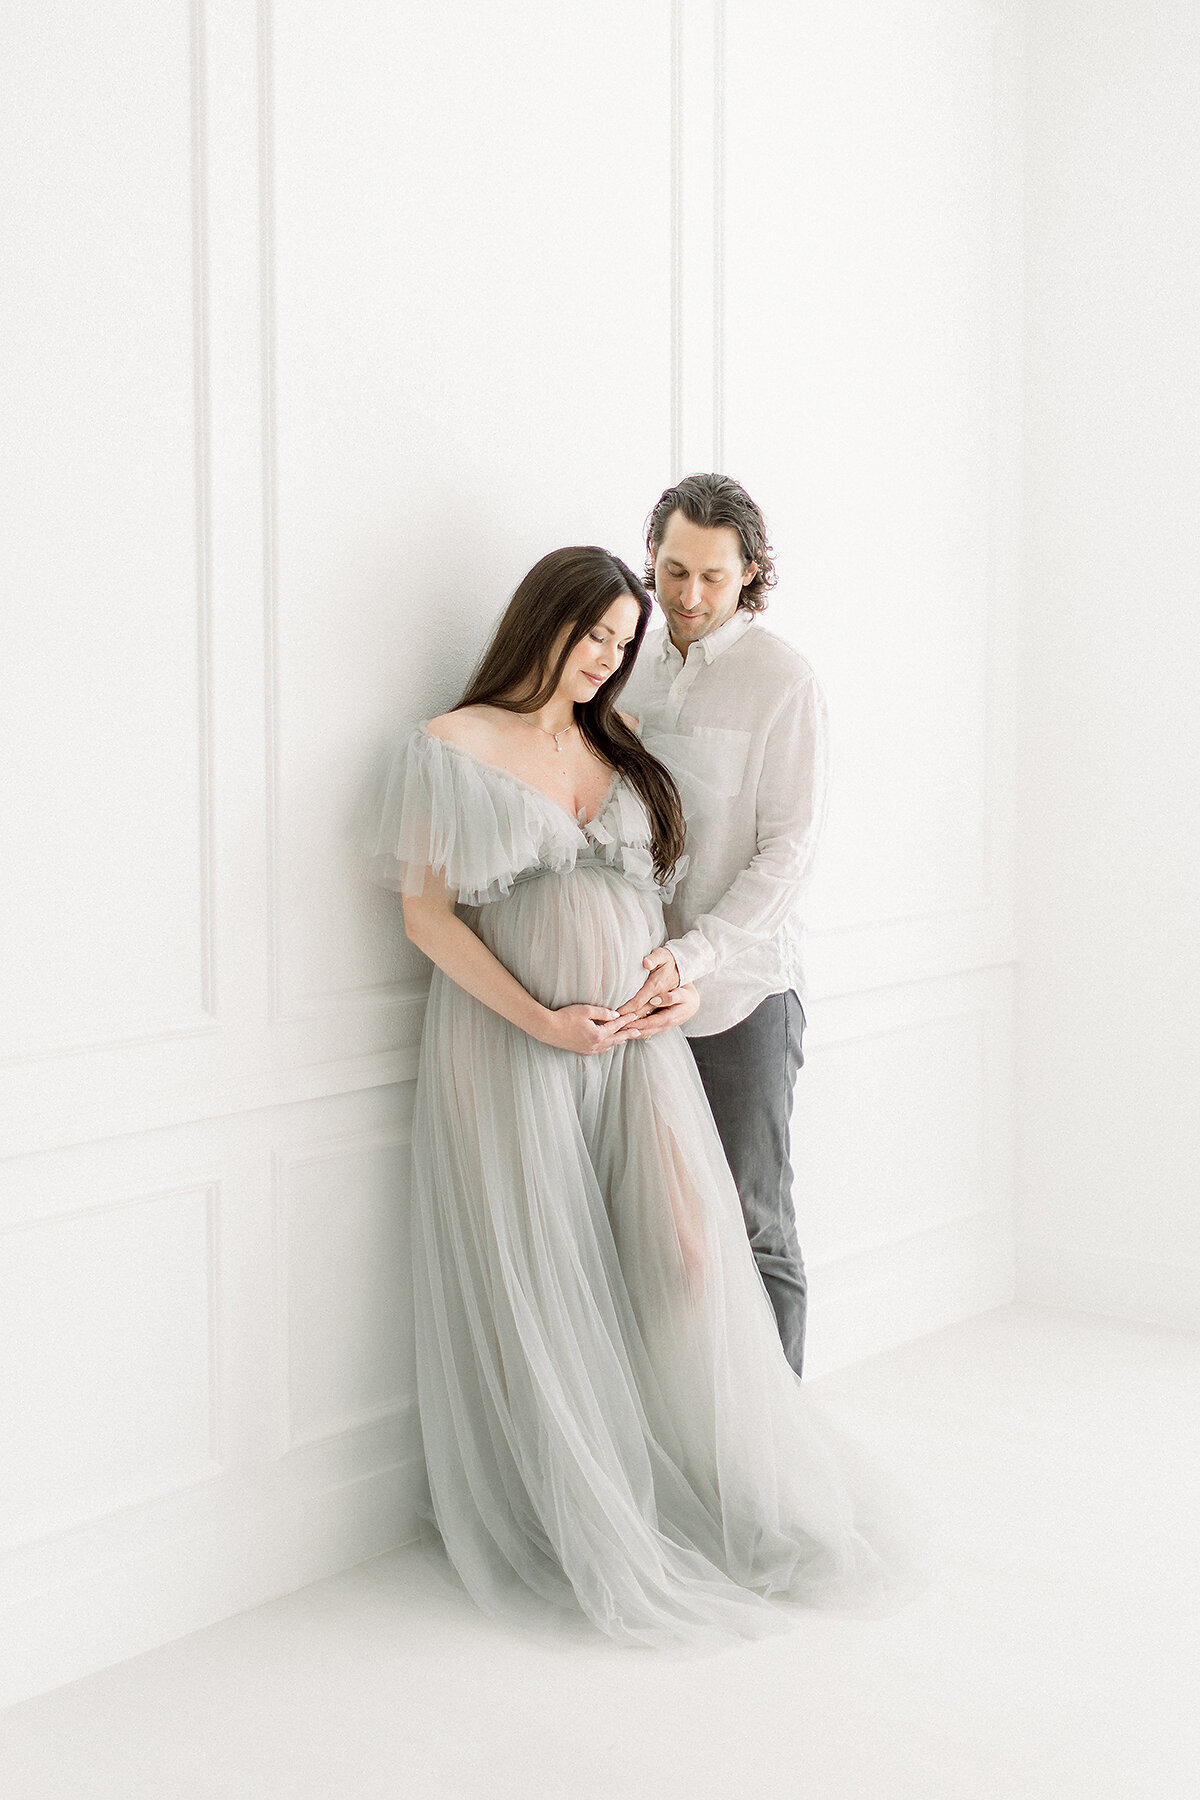 Portrait of an expecting Dallas mom leaning on a wall with her spouse standing in front of her as he holder her belly for their maternity session at a Dallas photography studio.